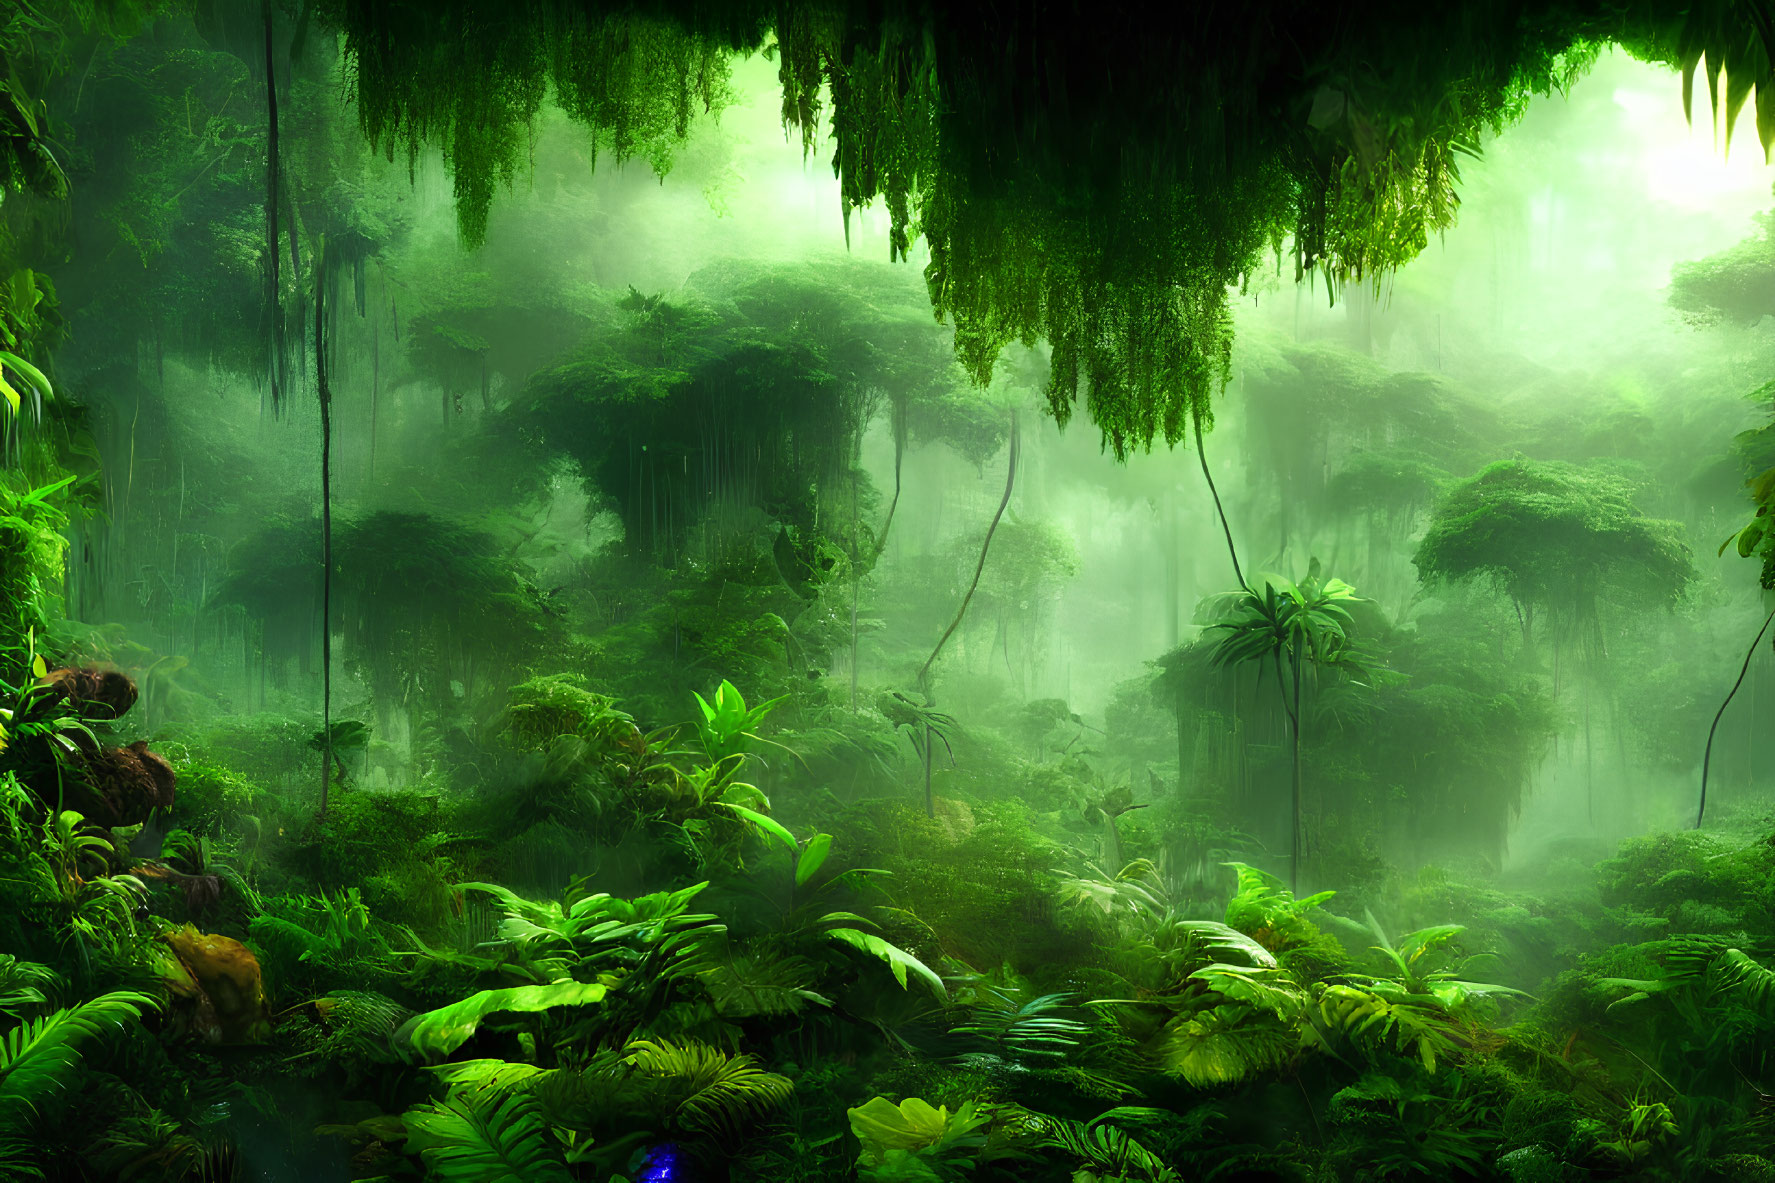 Lush Jungle Scene with Hanging Vines and Misty Atmosphere